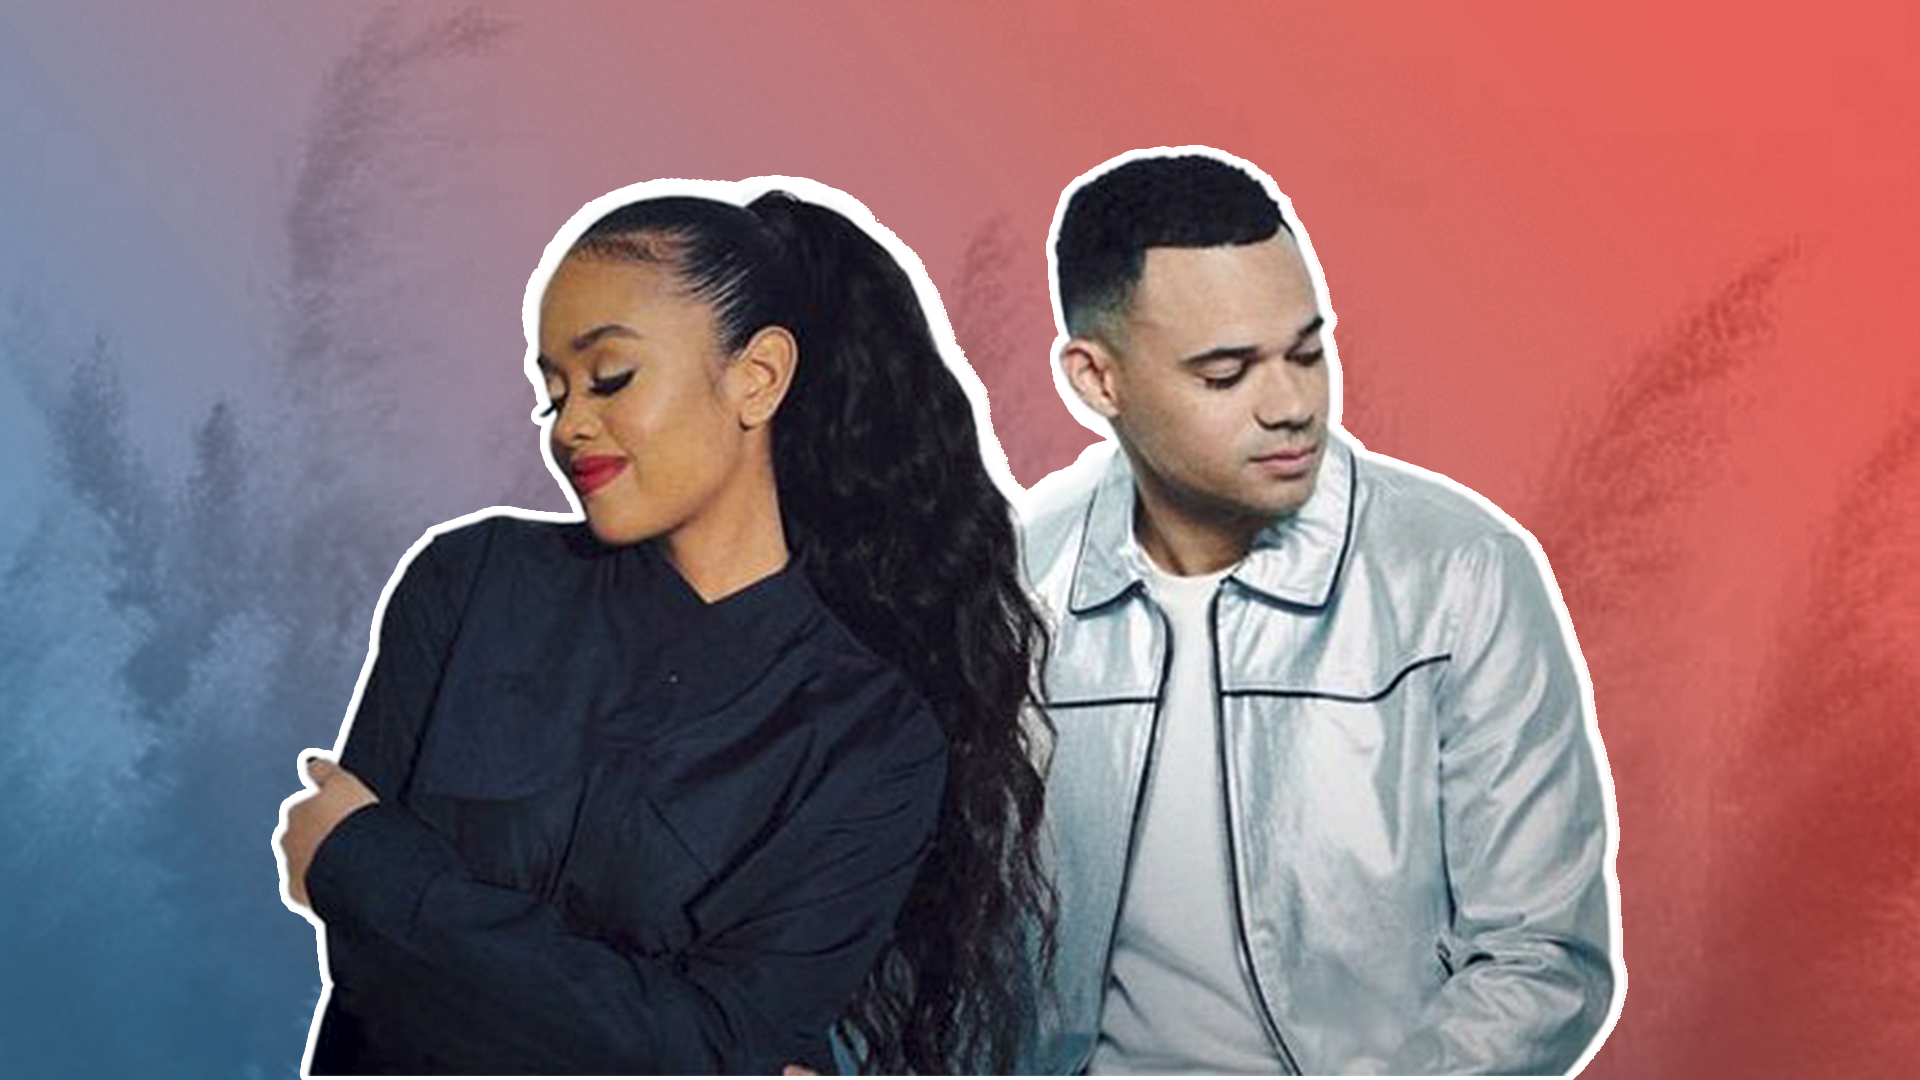 Tauren Wells and H.E.R. collaboration photo